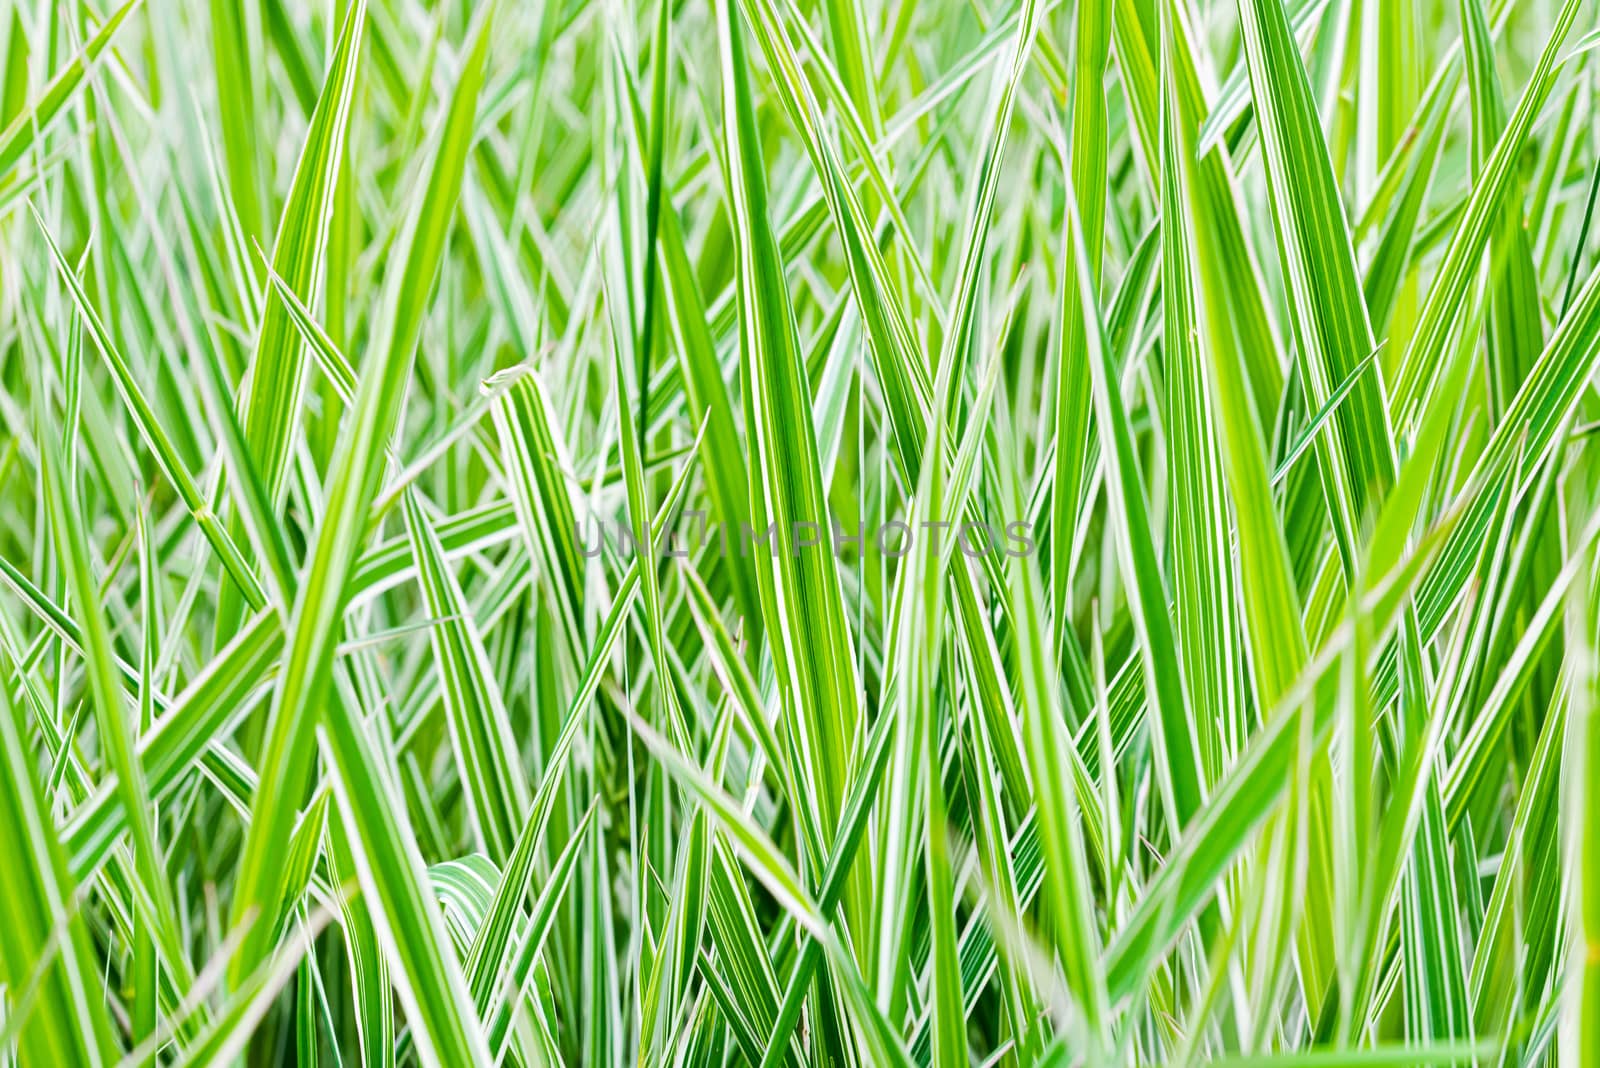 Green and white Phalaris arundinacea leaves, also known as reed canary grass and gardener's garters, growing in a park at the beginning of spring, in Kiev, Ukraine